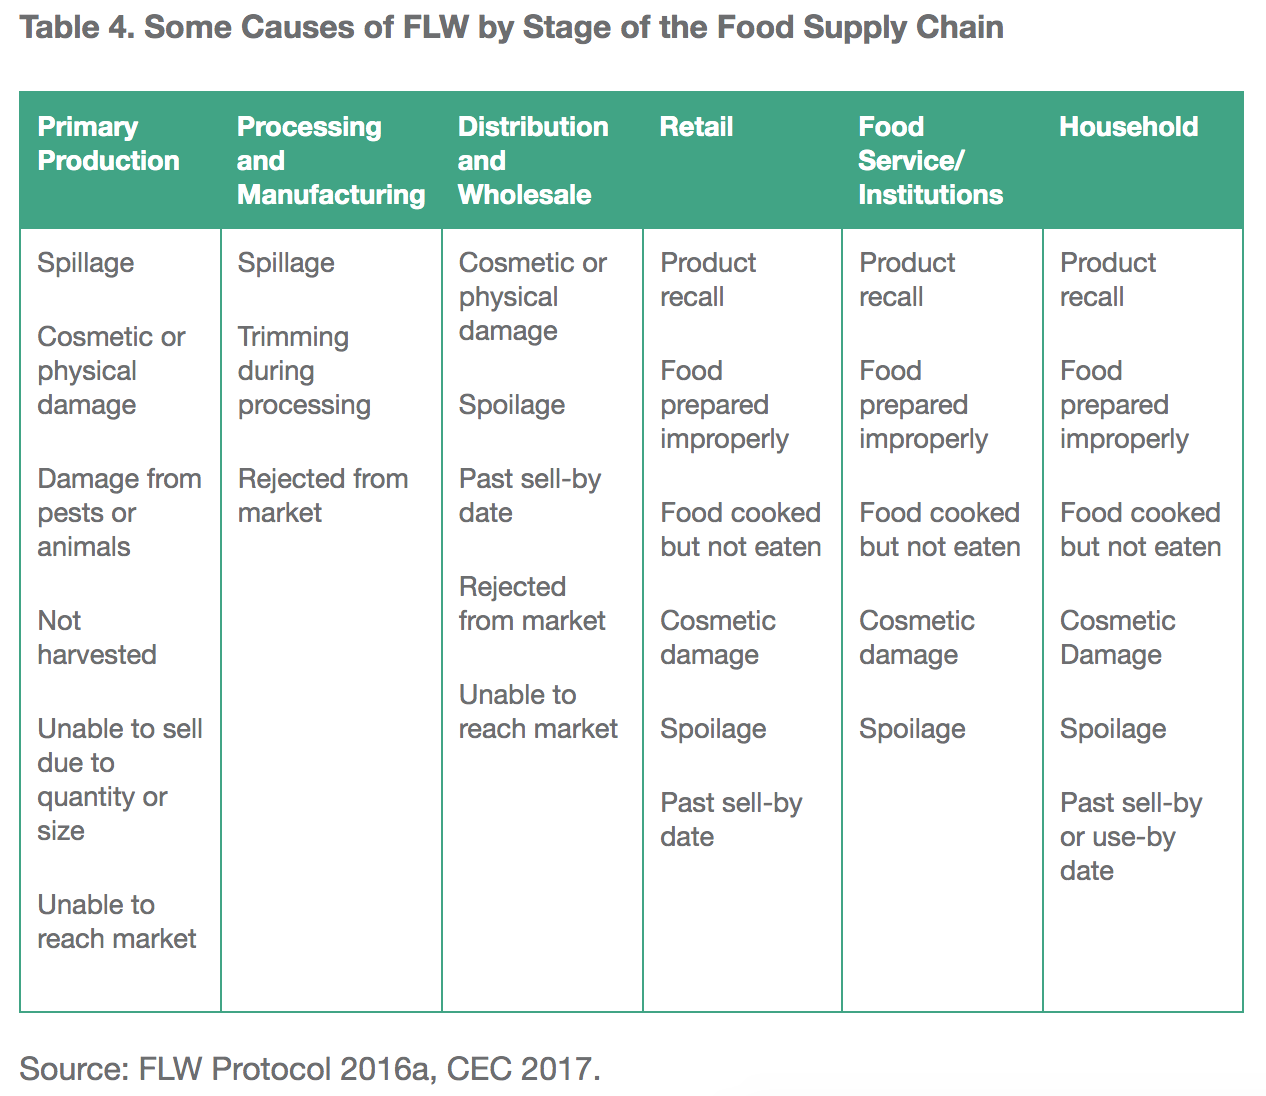 CEC table of some causes of food loss and waste along the food supply chain.